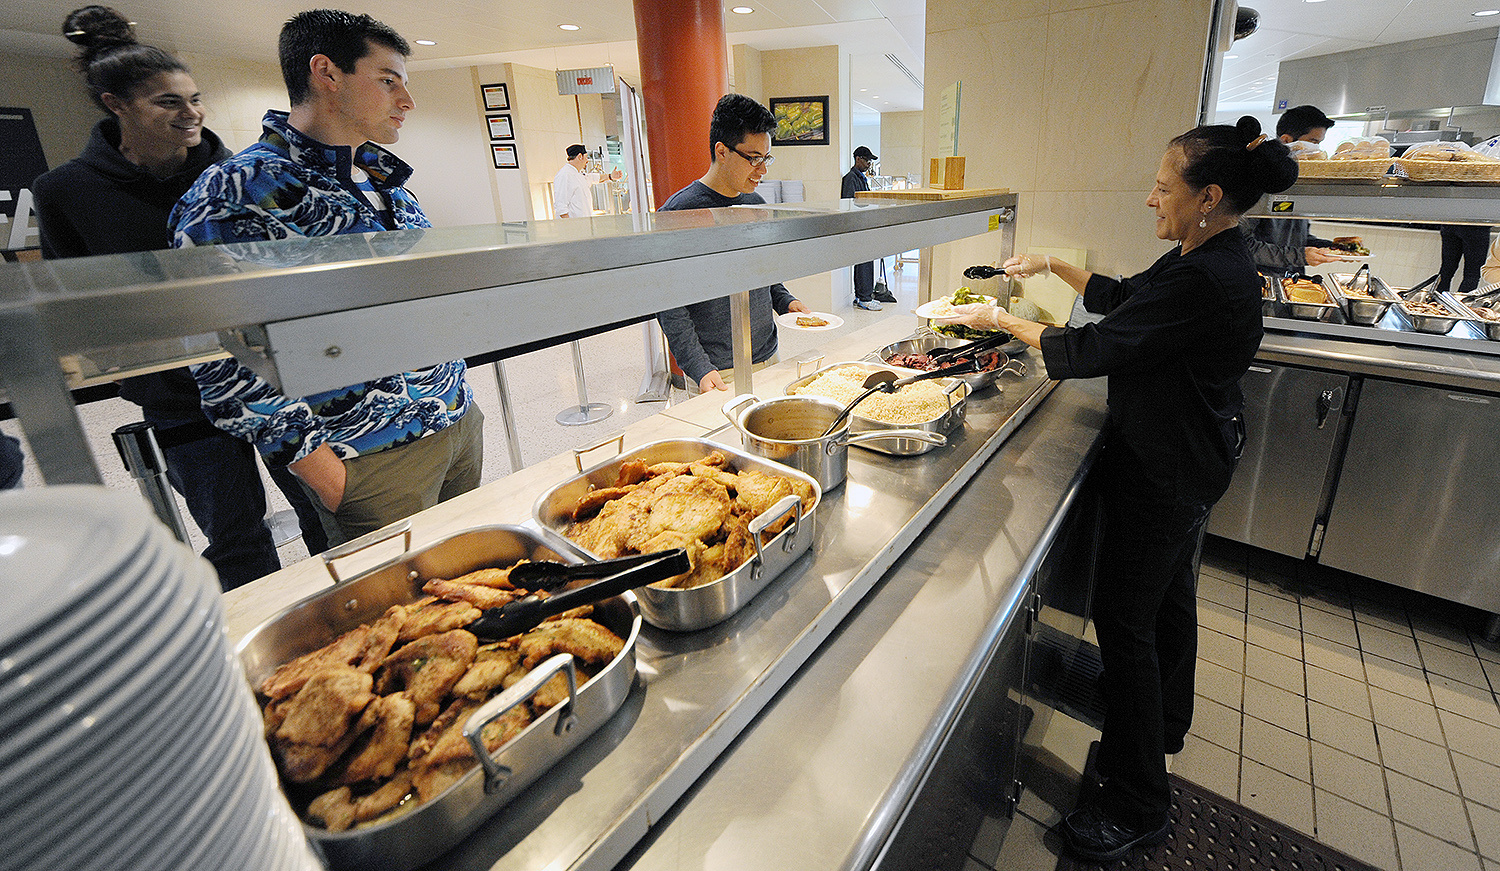 As part of Wesleyan's sustainability efforts, the Wesleyan Student Association Dining Committee removed all trays from the Usdan Marketplace in 2009. The "traylessness" action is one way Wesleyan has worked to reduce food waste. 